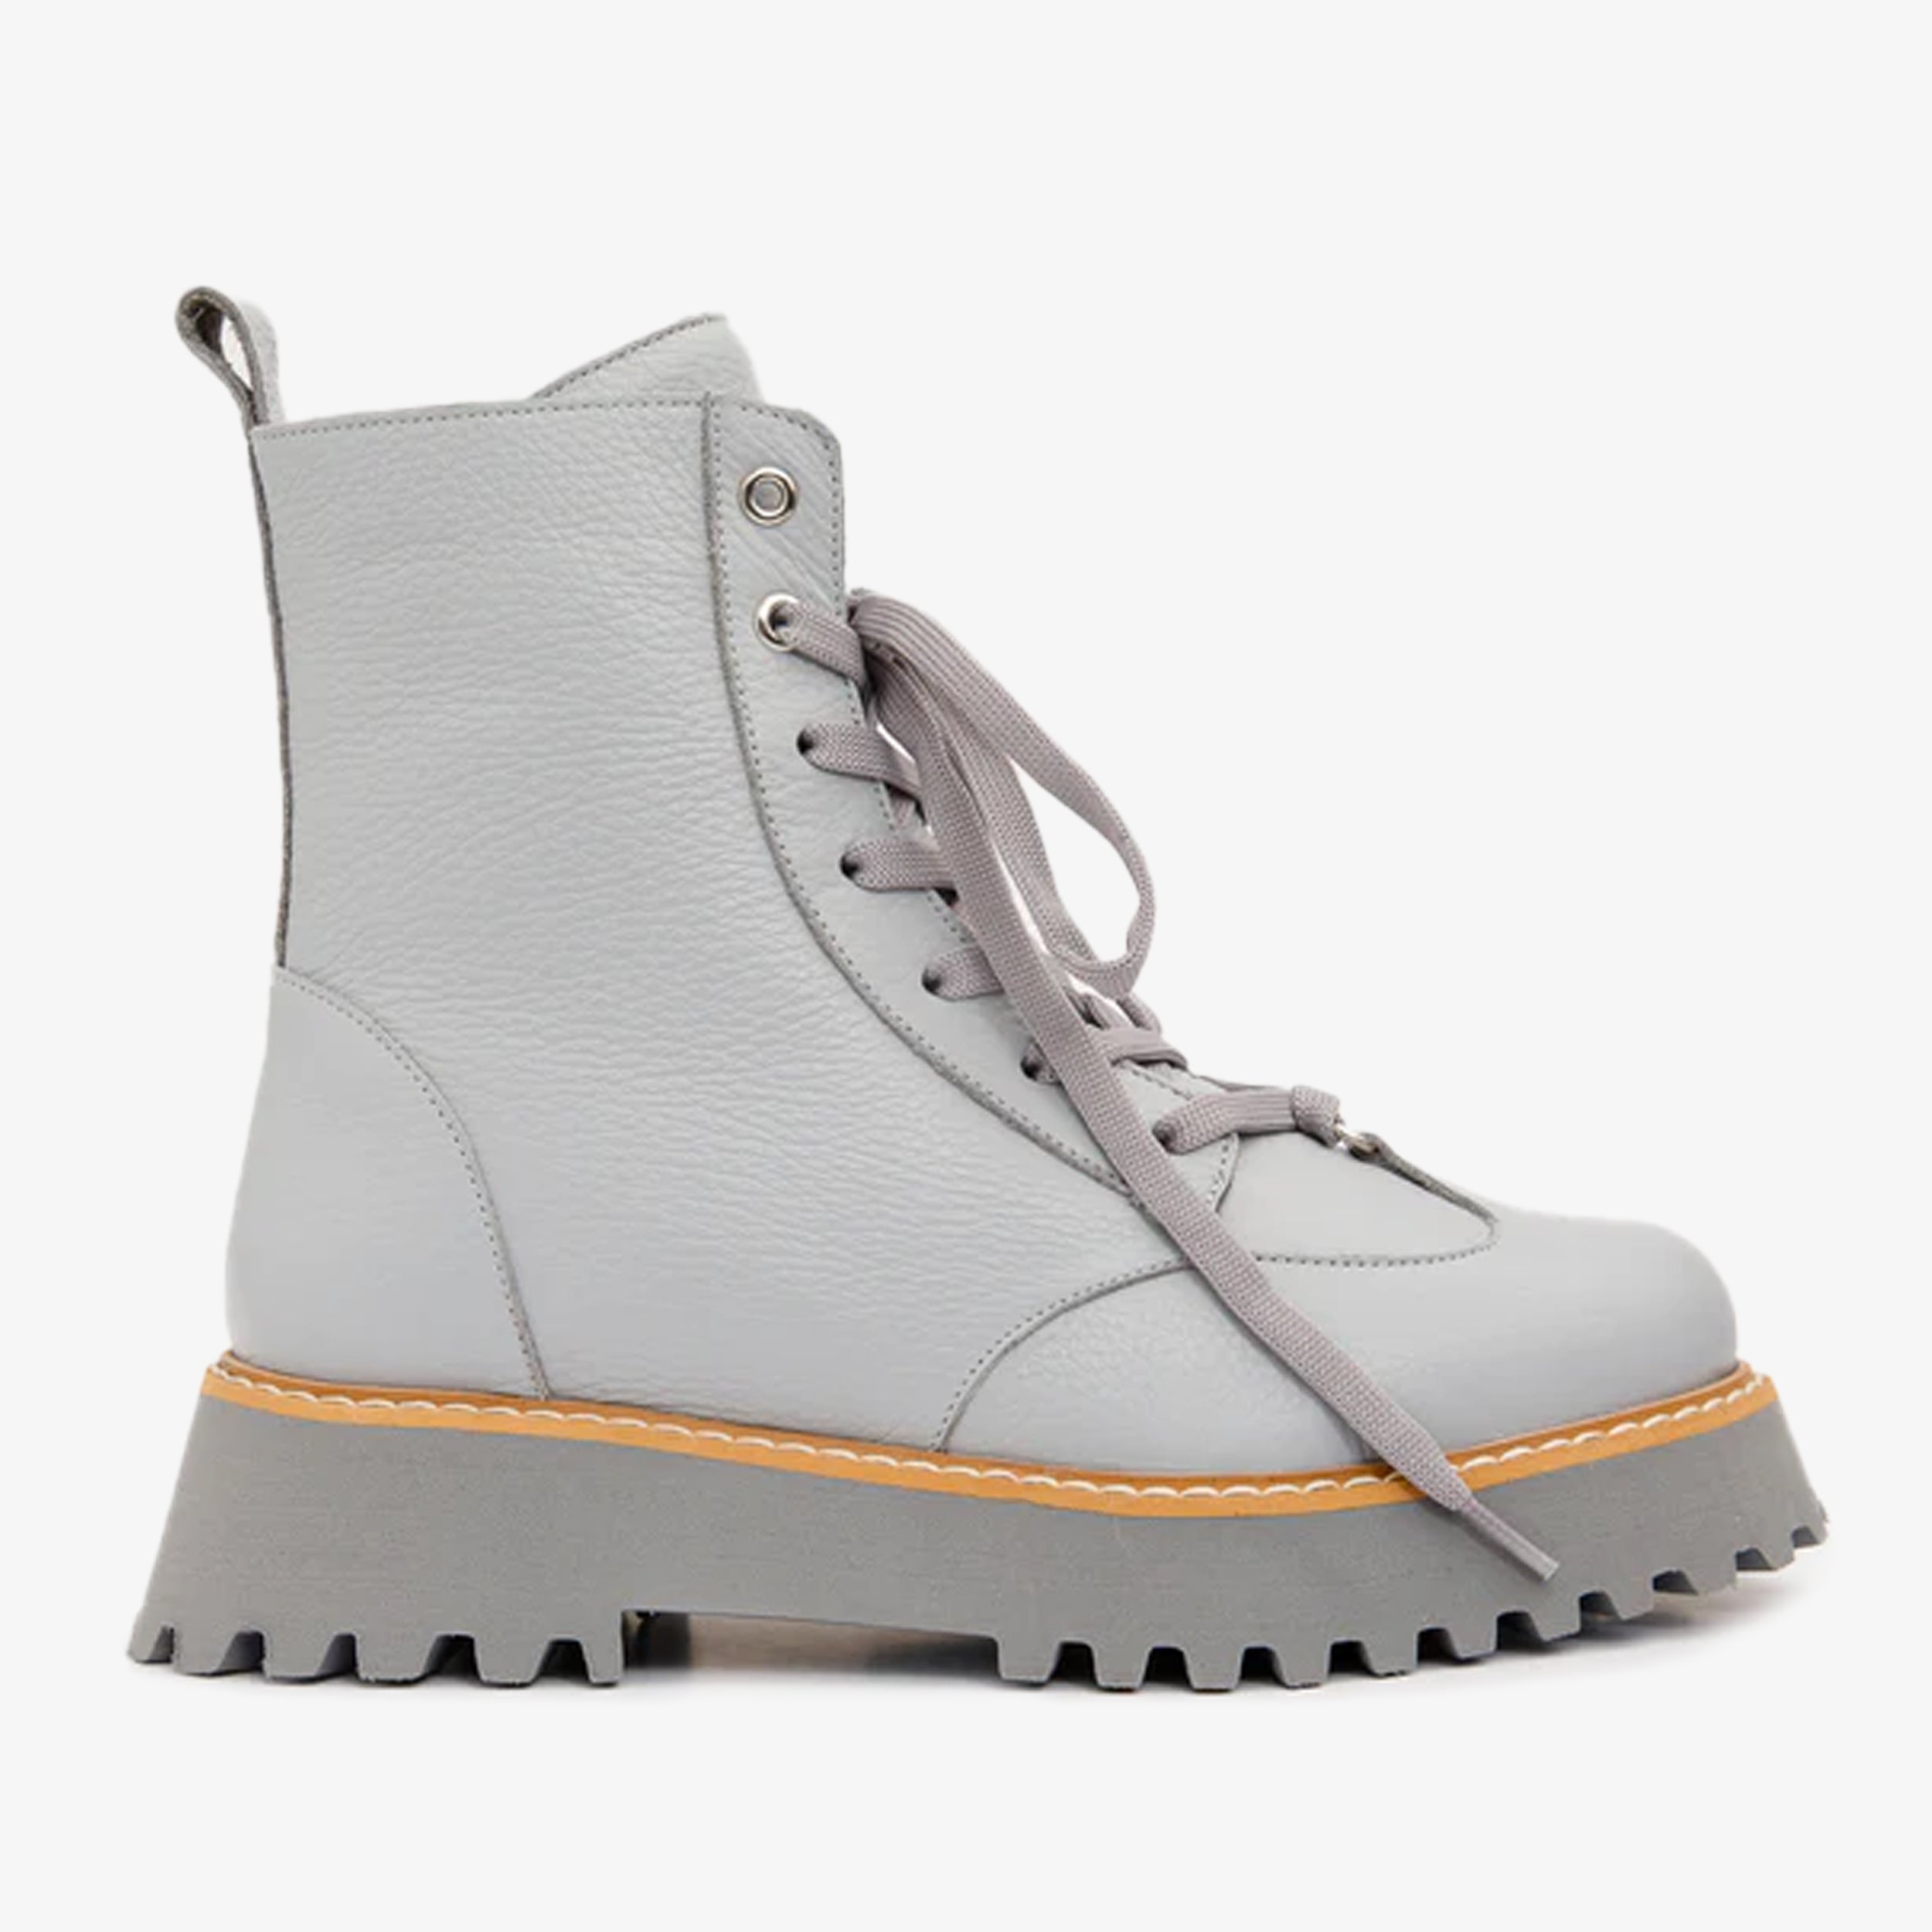 The Yildiz Grey Leather Lace-Up Ankle Women Boot With a Side Zipper